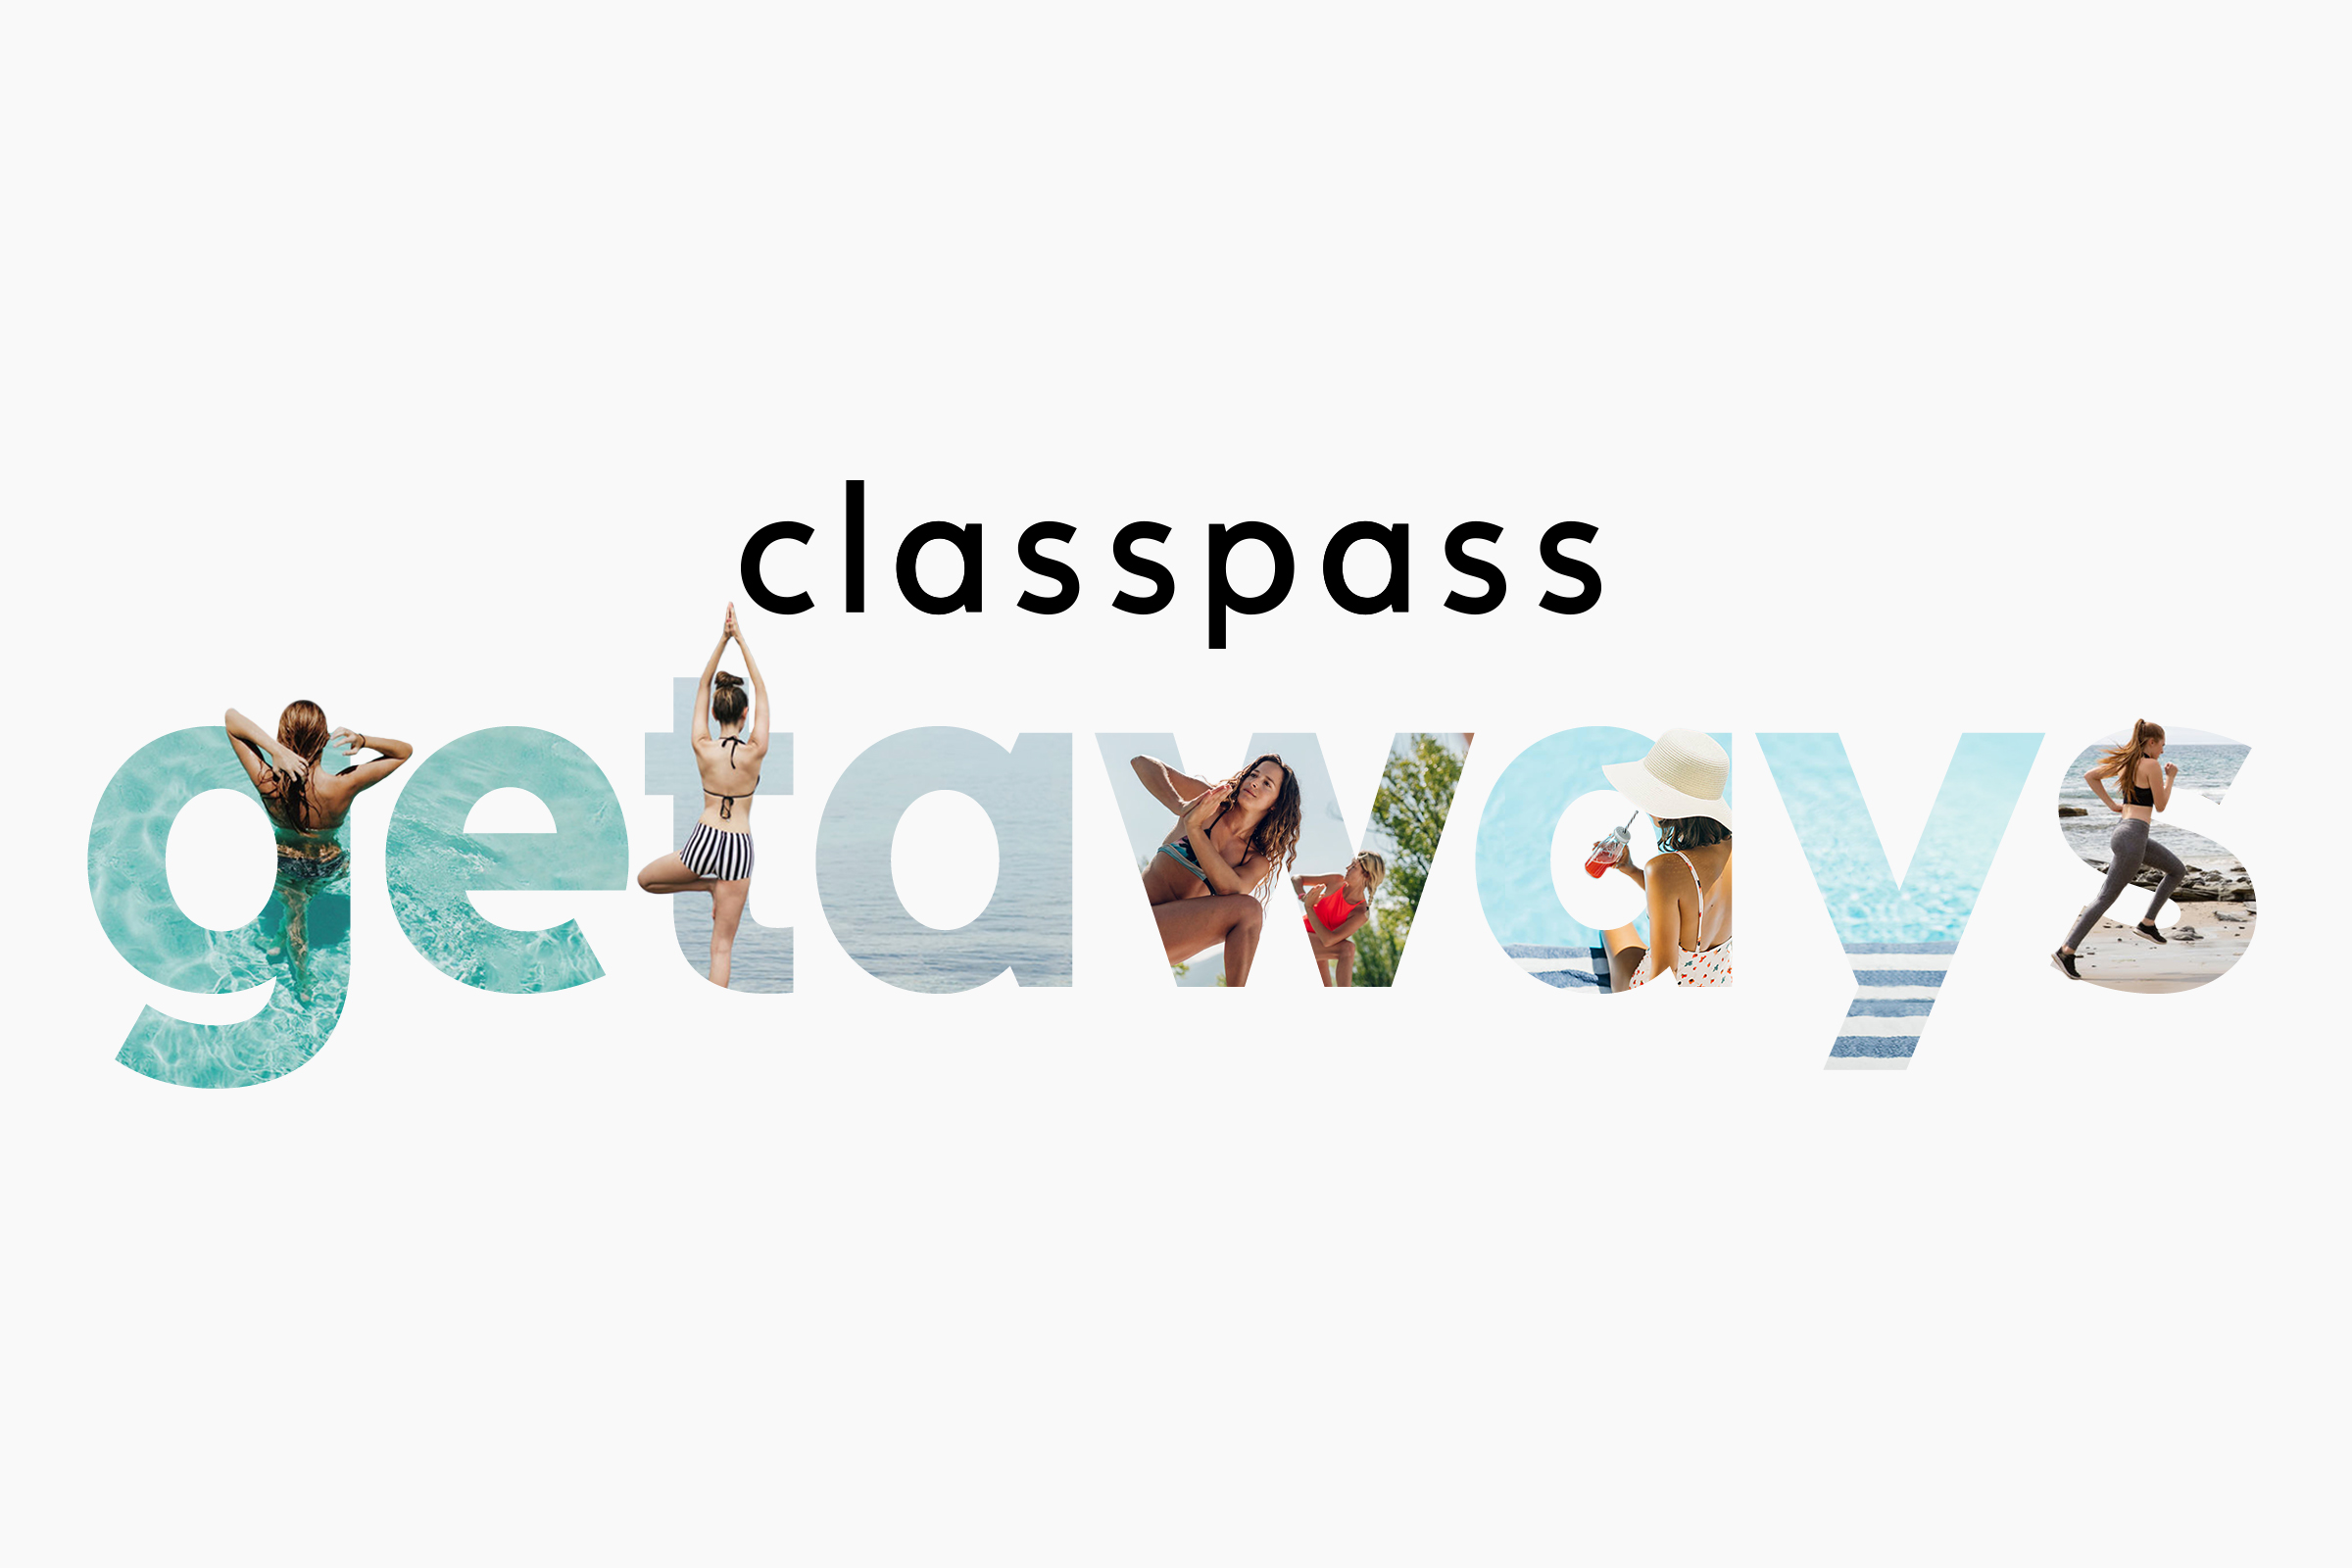 ClassPass Plans To Roll Out Series of Experiential Events Exclusive to Subscribers